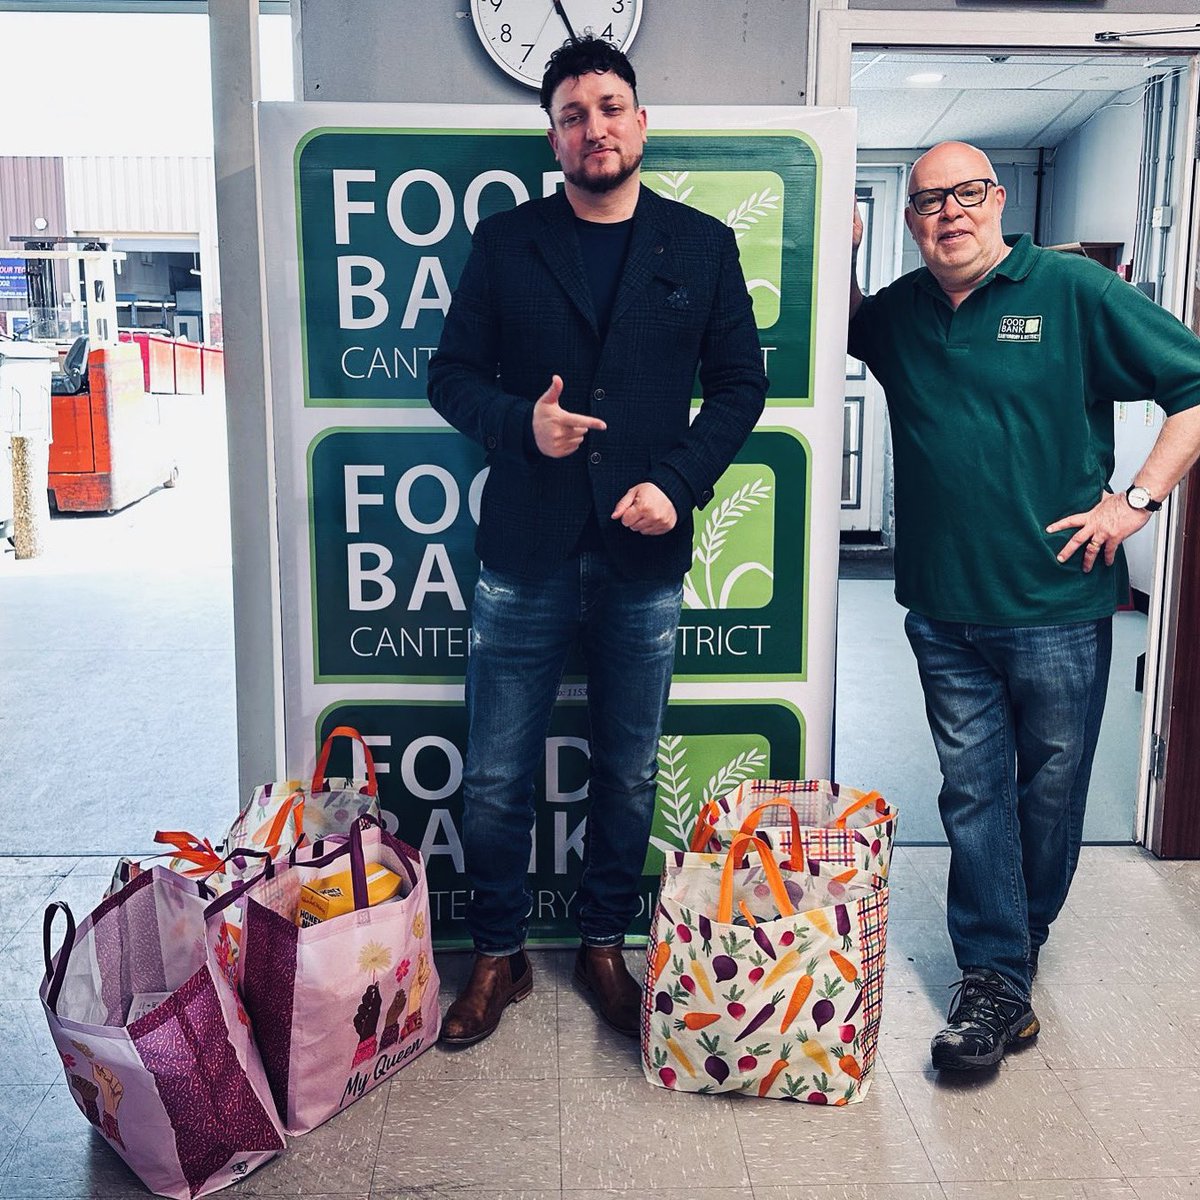 Thank you to our great friend and supporter @SingleDadSW for dropping donations from @CodCanterbury this morning! Great to see you and thanks to everyone who donated! #foodiscare